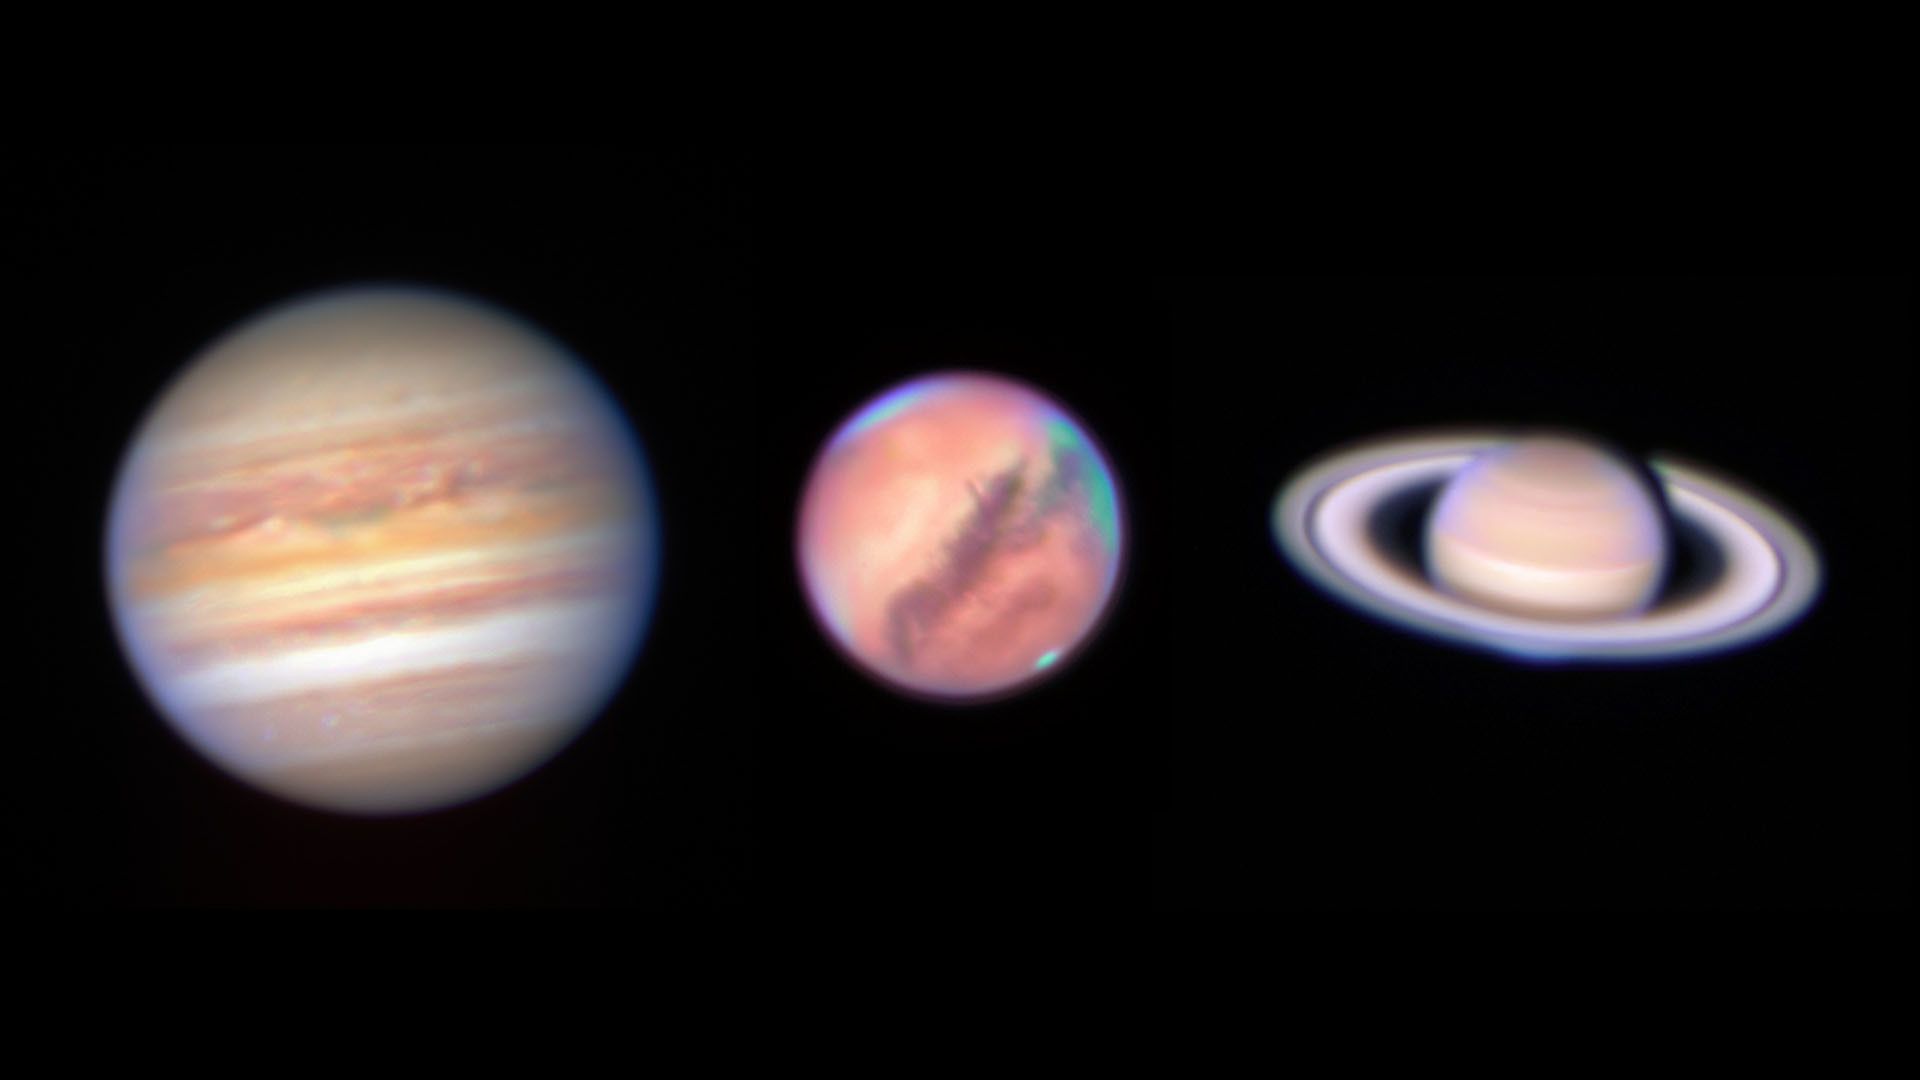 Jupiter, Mars and Saturn seen by telescopes on Earth.